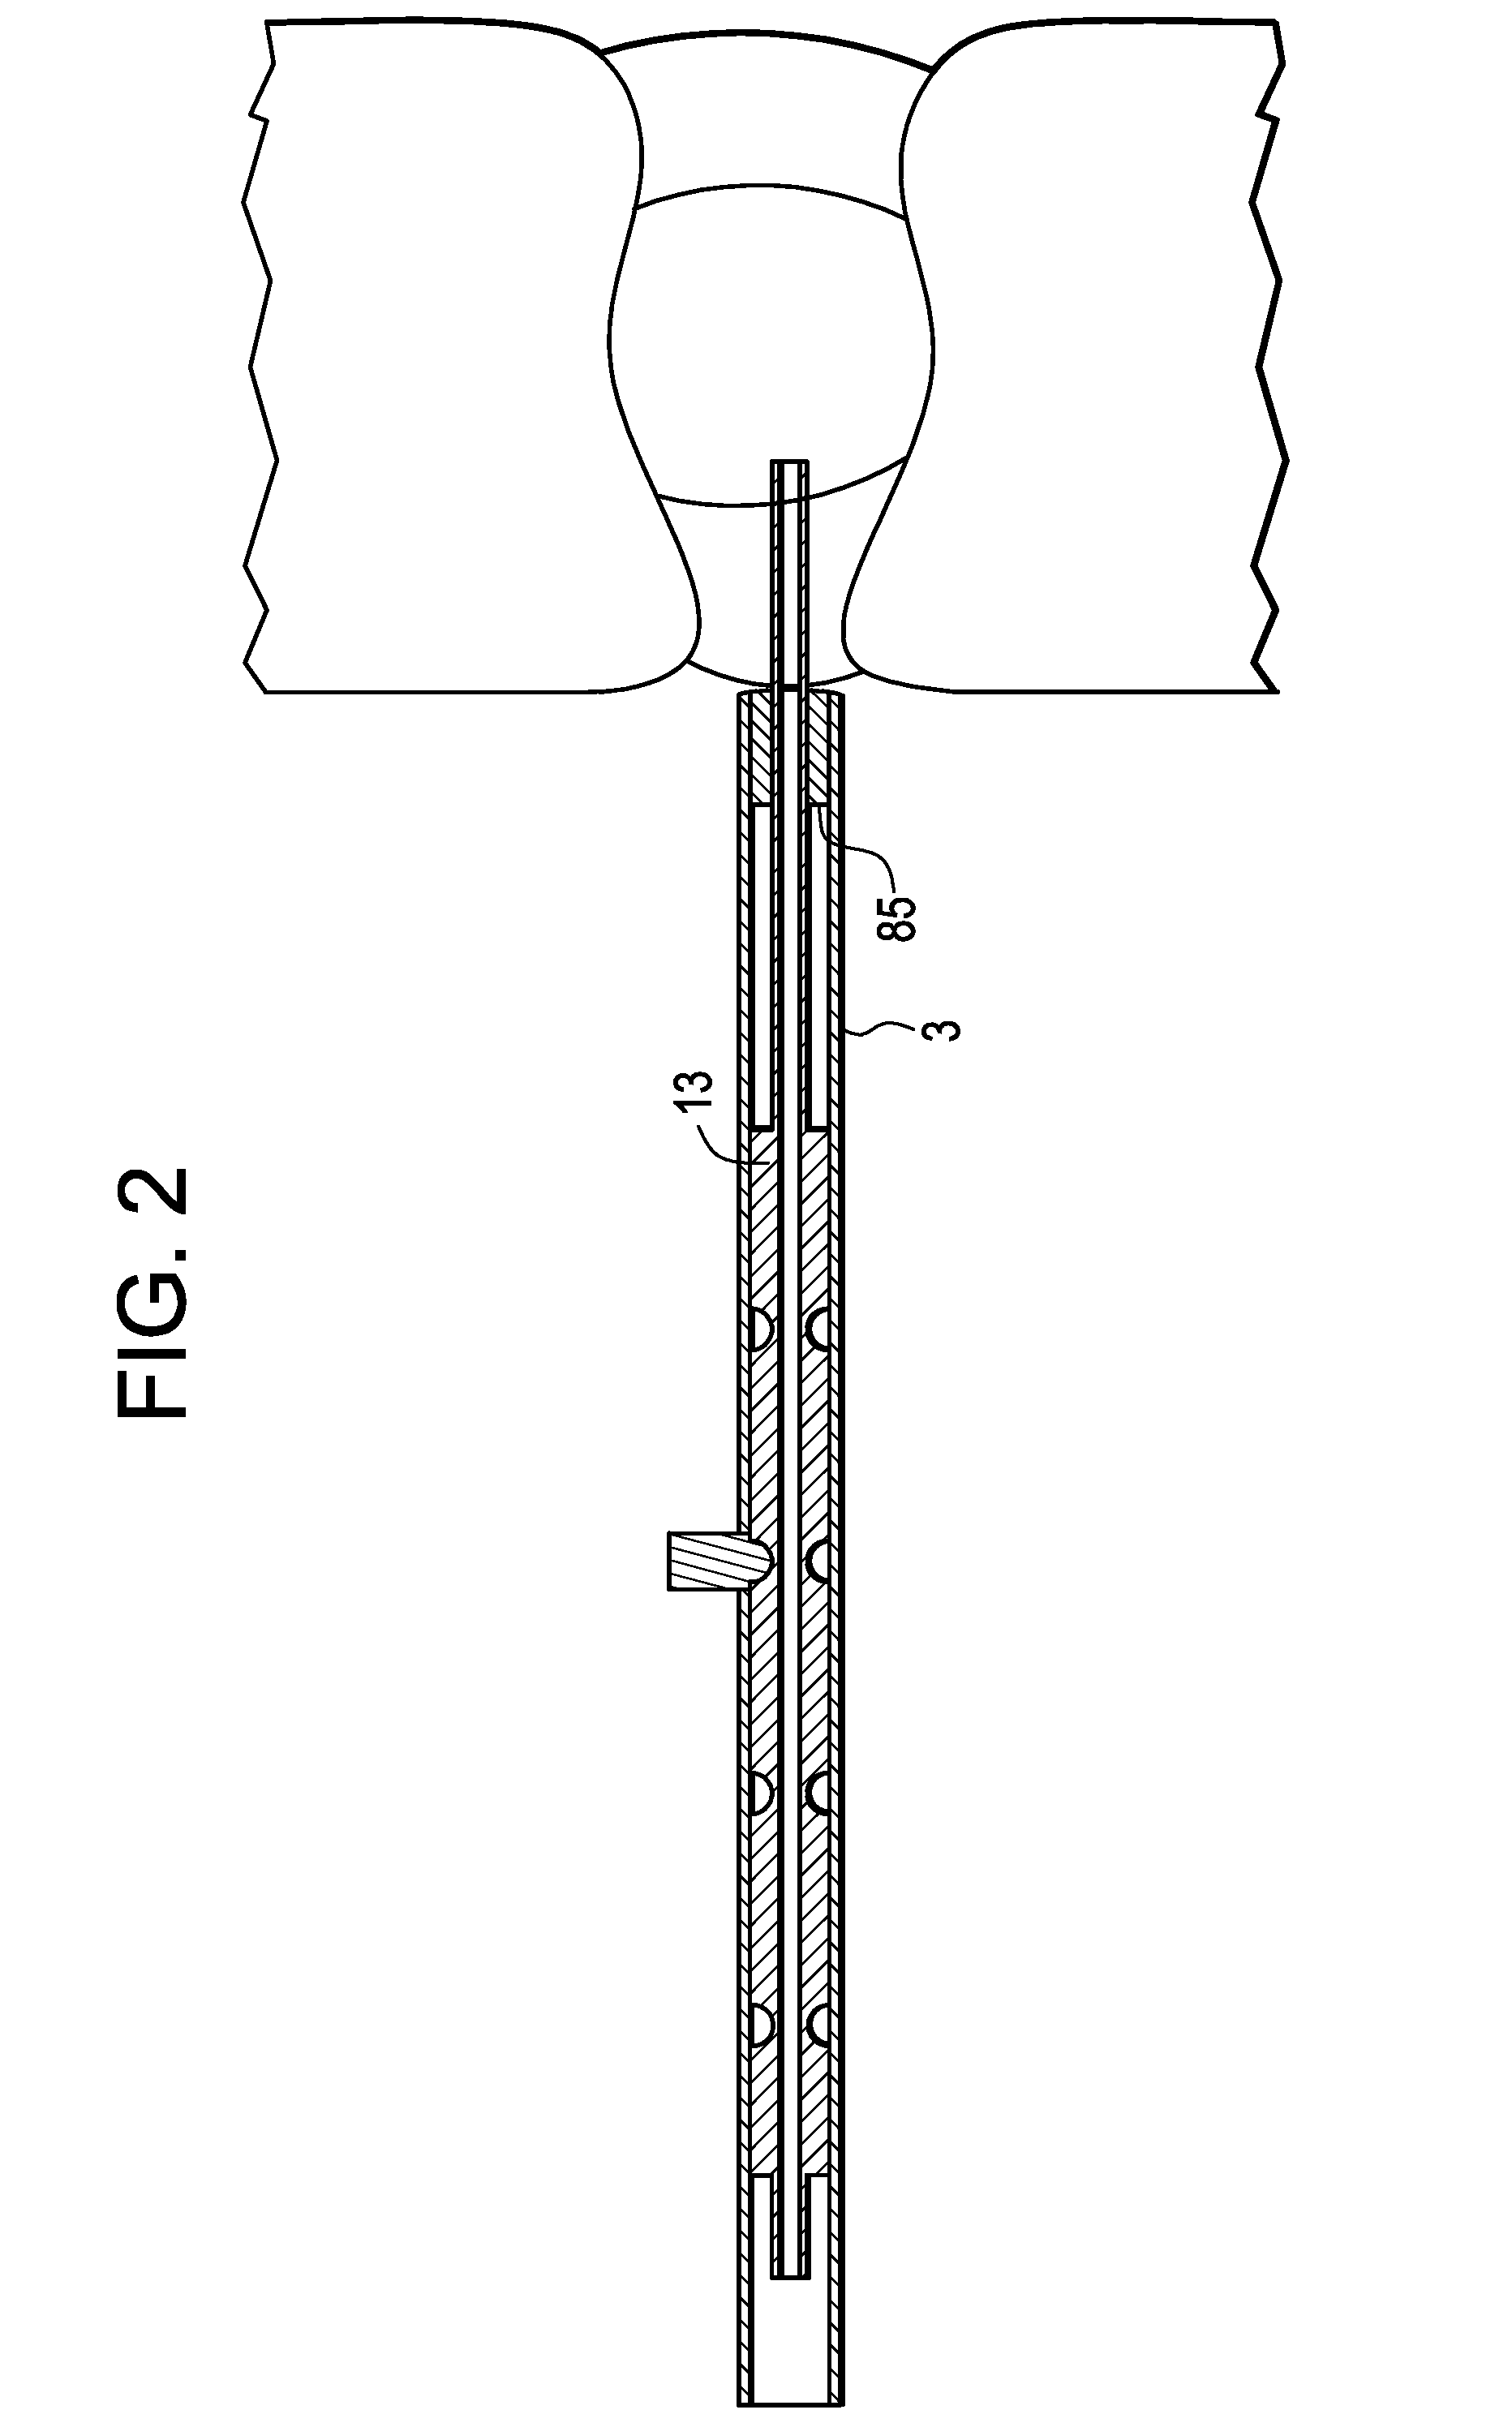 Intervertebral Disc Puncture and Treatment System